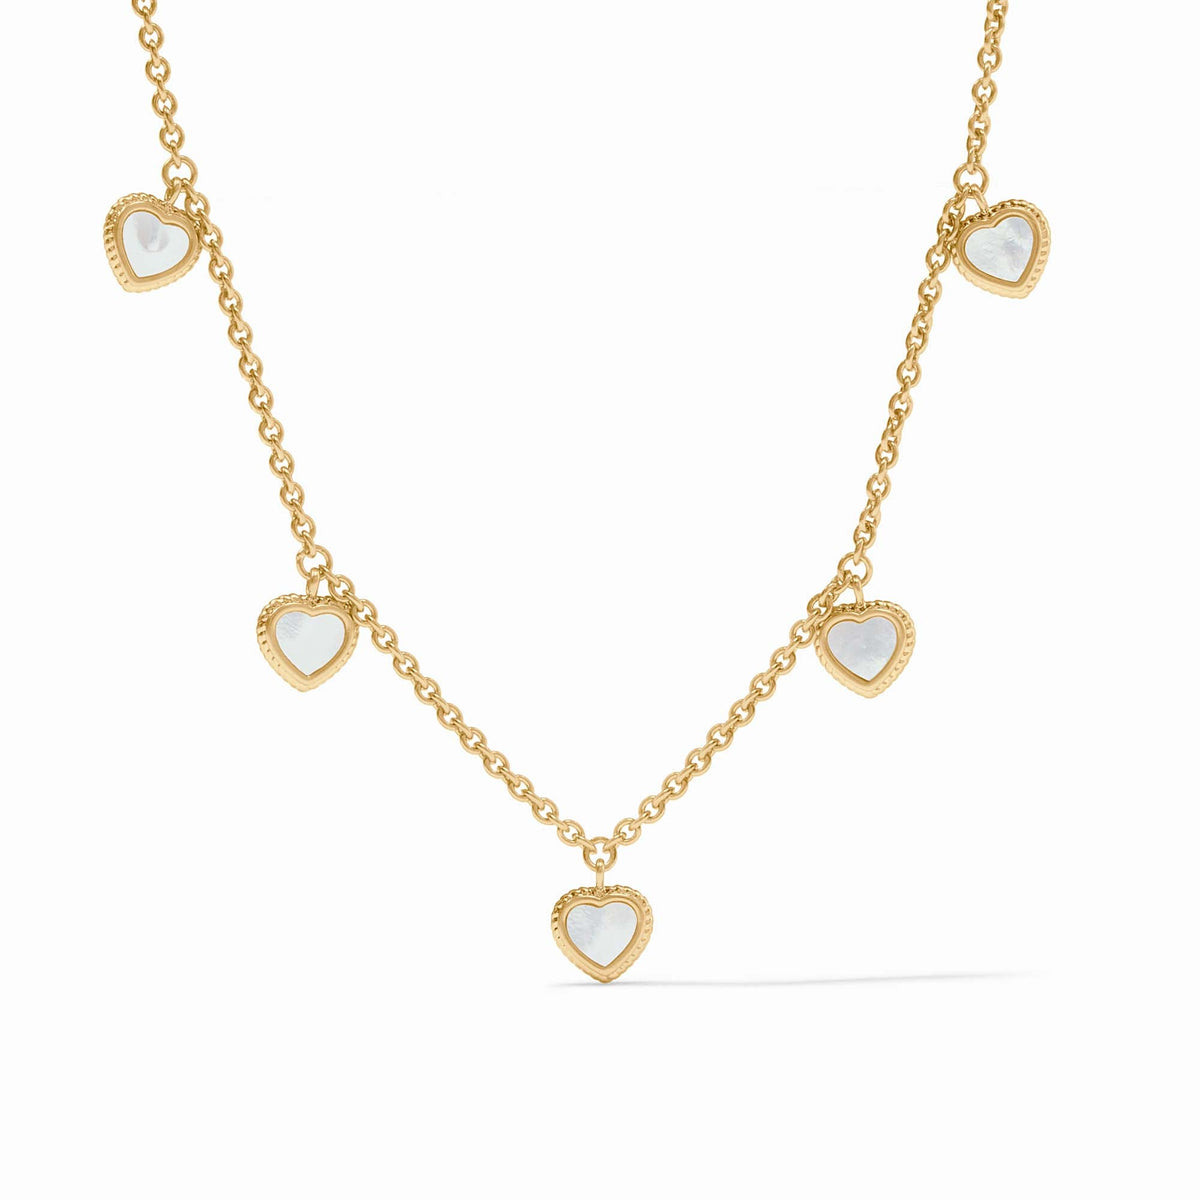 Julie Vos - Heart Delicate Charm Necklace, Mother of Pearl